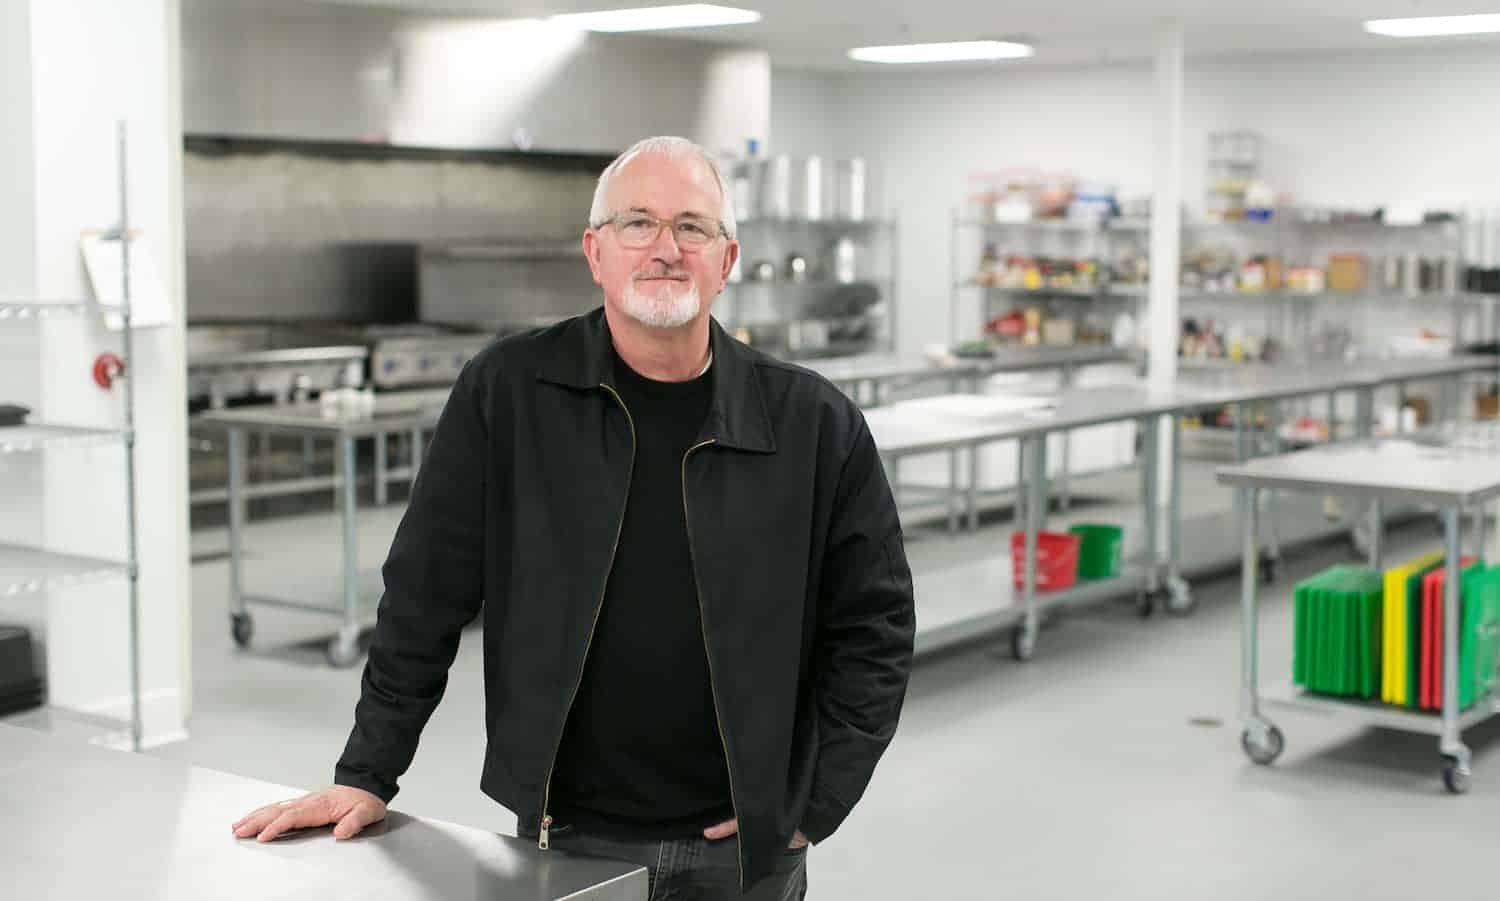 Robert Egger leads L.A. Kitchen with love, purpose, and a little bit of rock and roll, using food to enhance the wellbeing of people in the community.